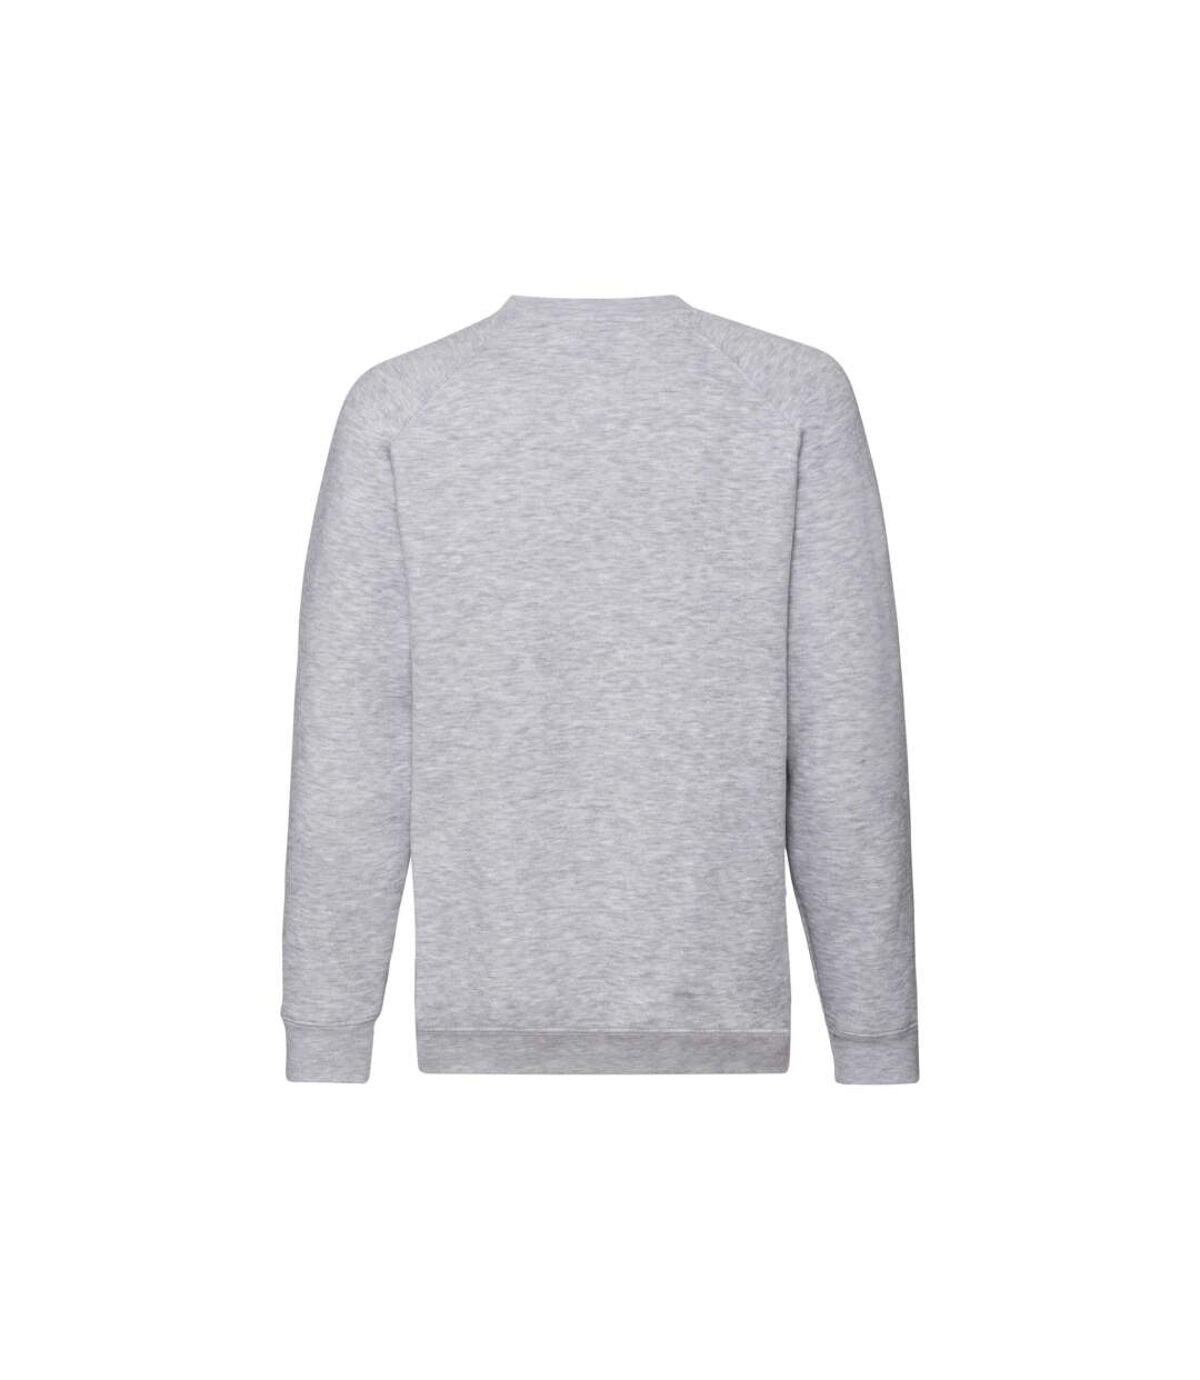 Fruit of the Loom - Sweat VINTAGE SMALL LOGO - Homme (Gris) - UTPC4408